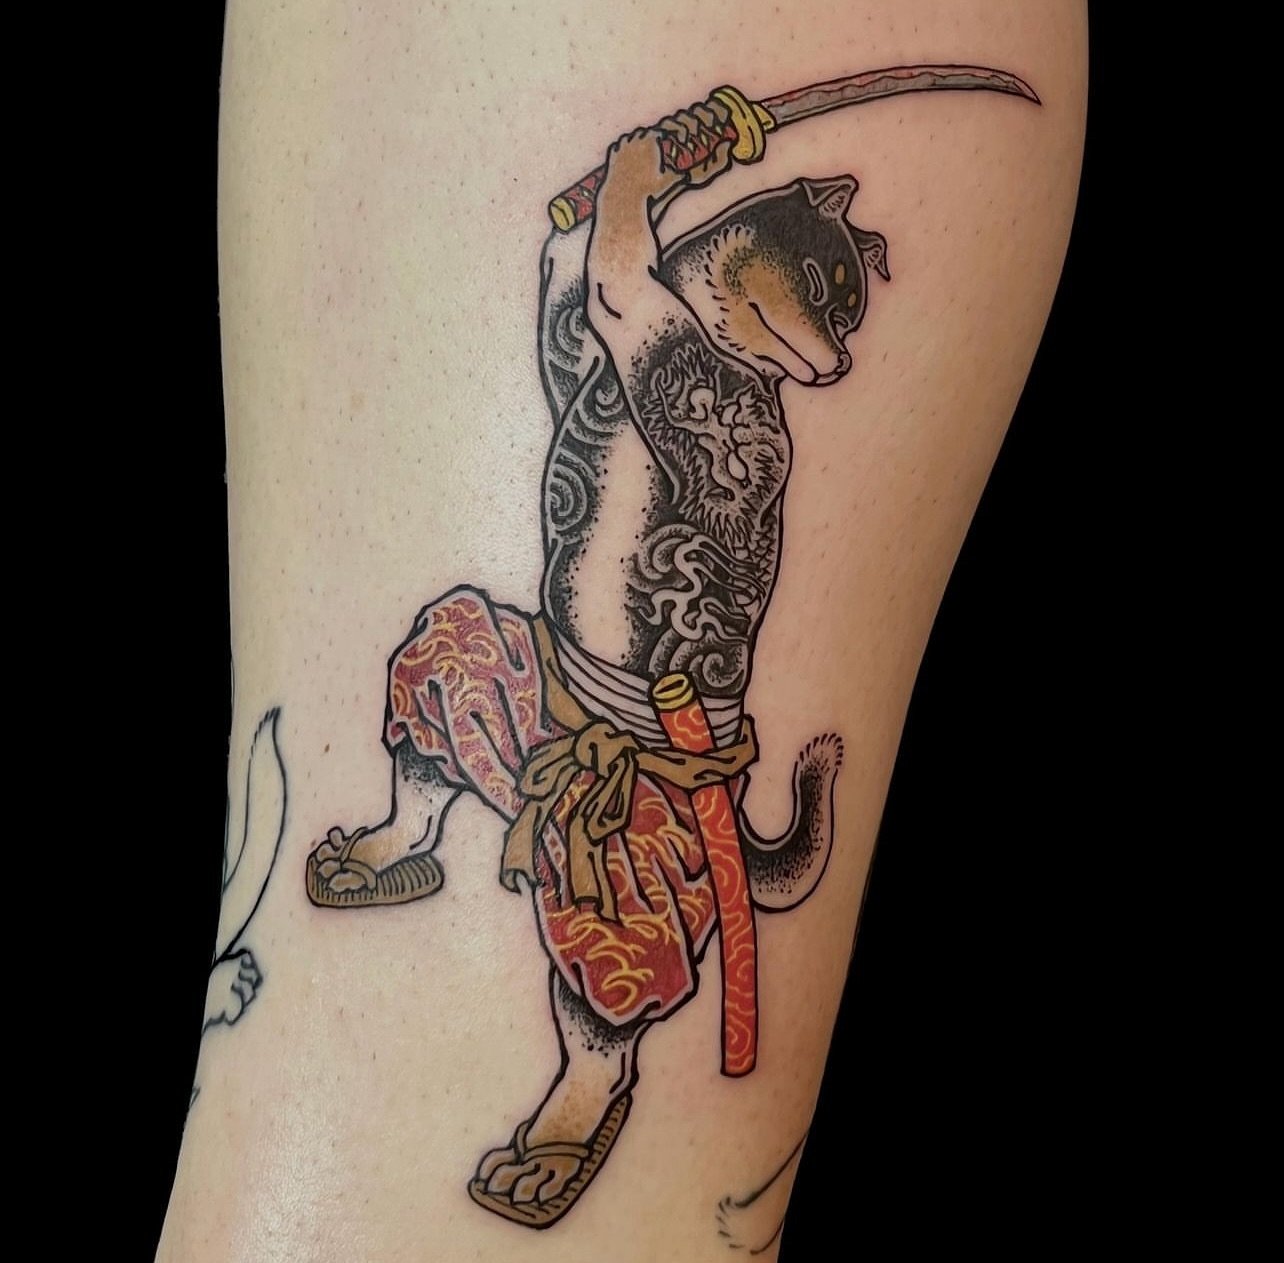 Custom Japanese kobold warrior 🐕
Artist: @joe_the_tattooer 
________________________________________________
[At Off the Ground Ink, we bring your tattoo ideas to life! 💭 For bookings and inquiries, reach out to us by email at offthegroundink@gmail